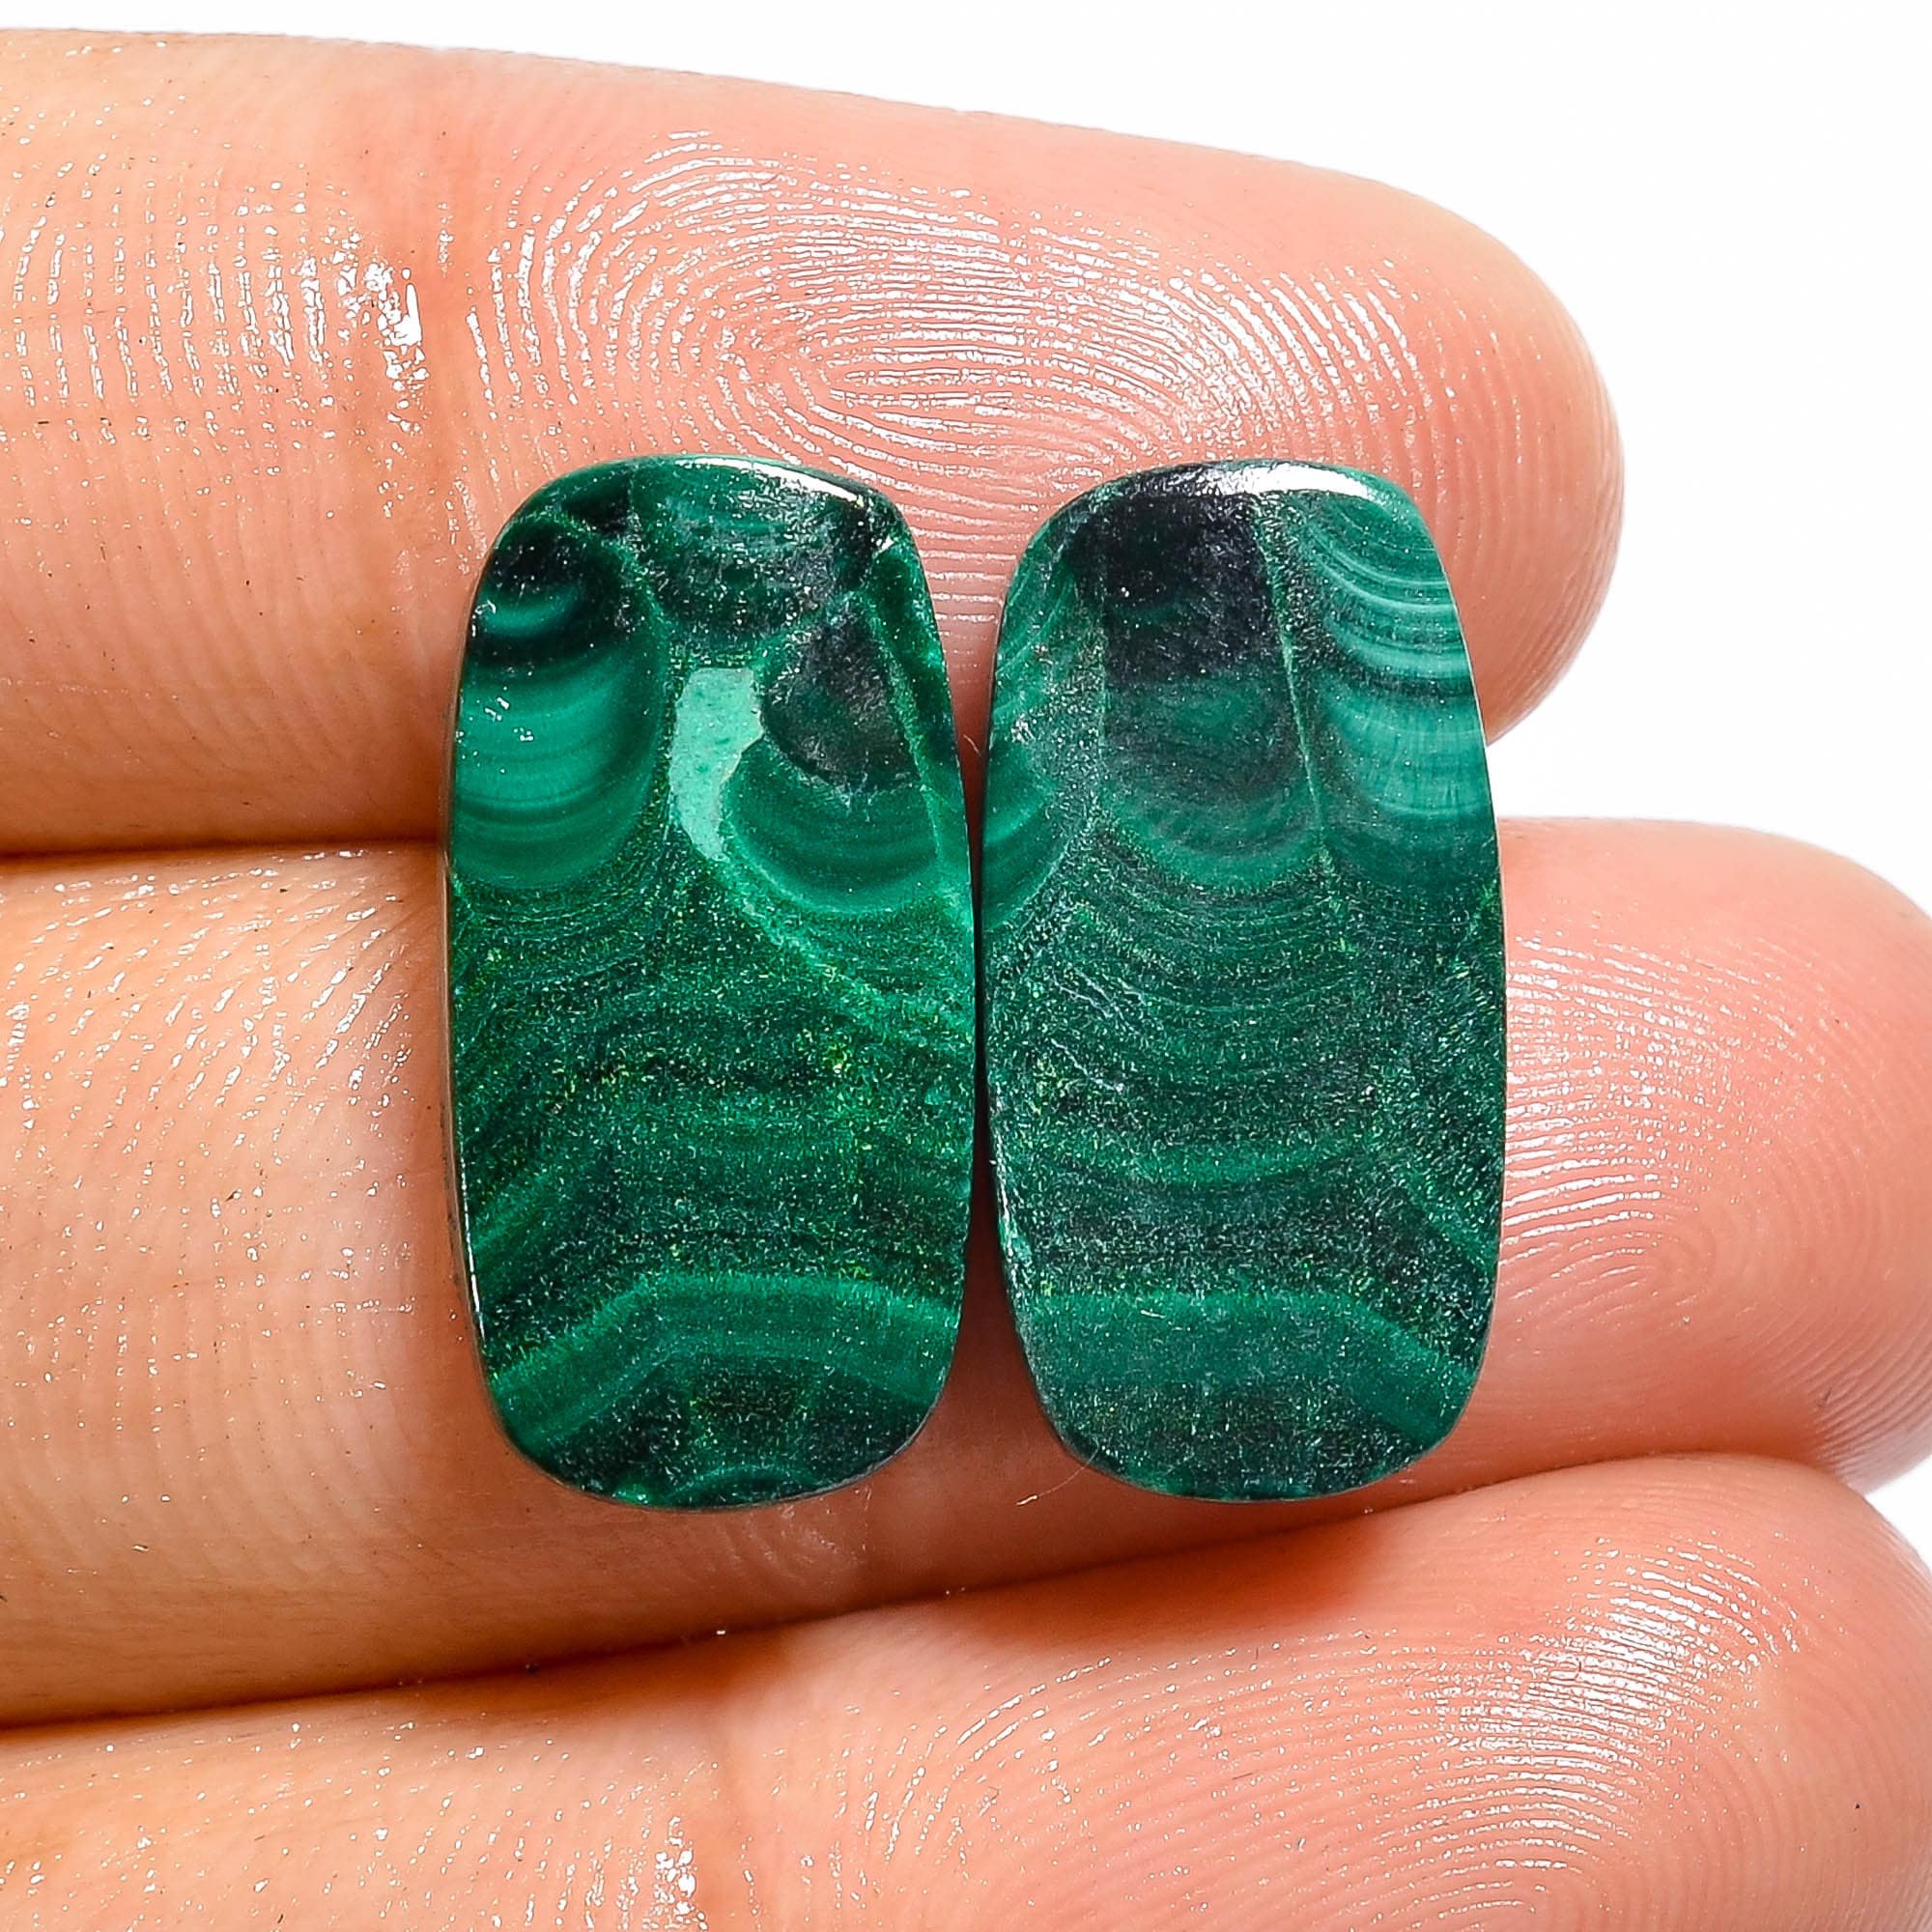 28X21X5 mm JMK-9260 Exclusive Top Grade Quality 100% Natural Spiny Copper Malachite Radiant Cabochon Gemstone For Making Jewelry 31.5 Ct